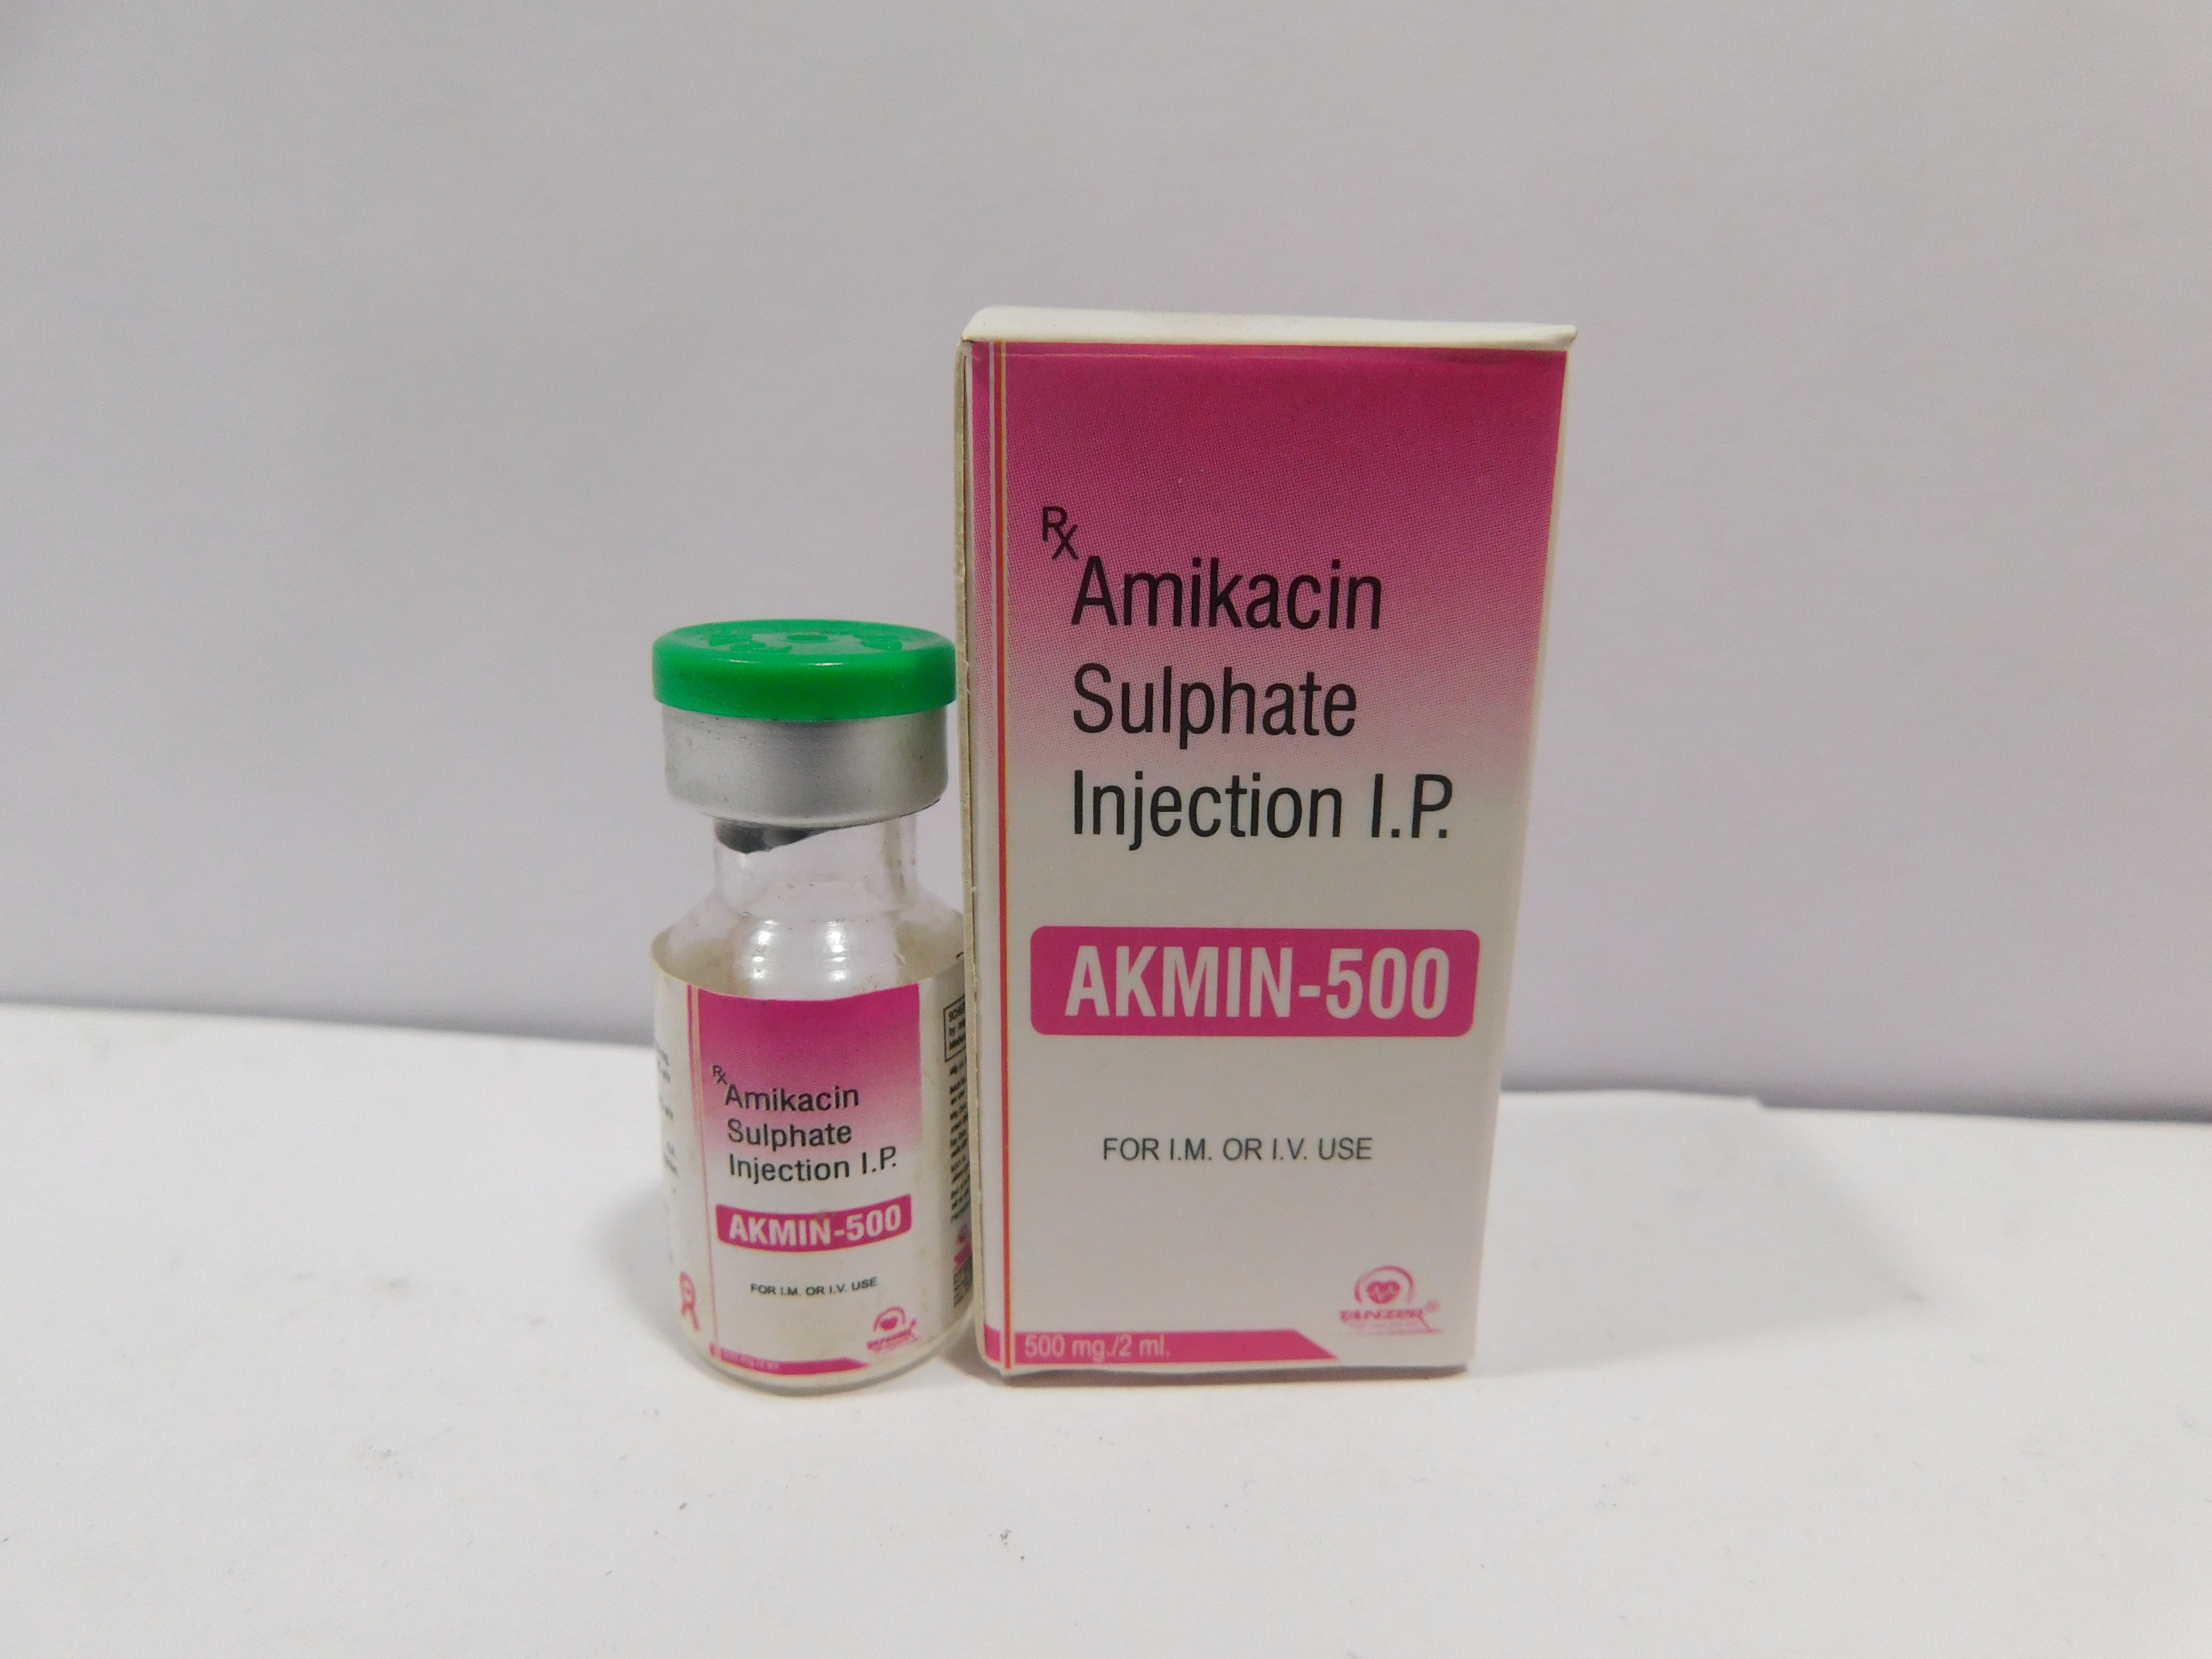 AKMIN 500 are Amikacin Sulphate injection I.P - Tanzer Lifecare Private Limited